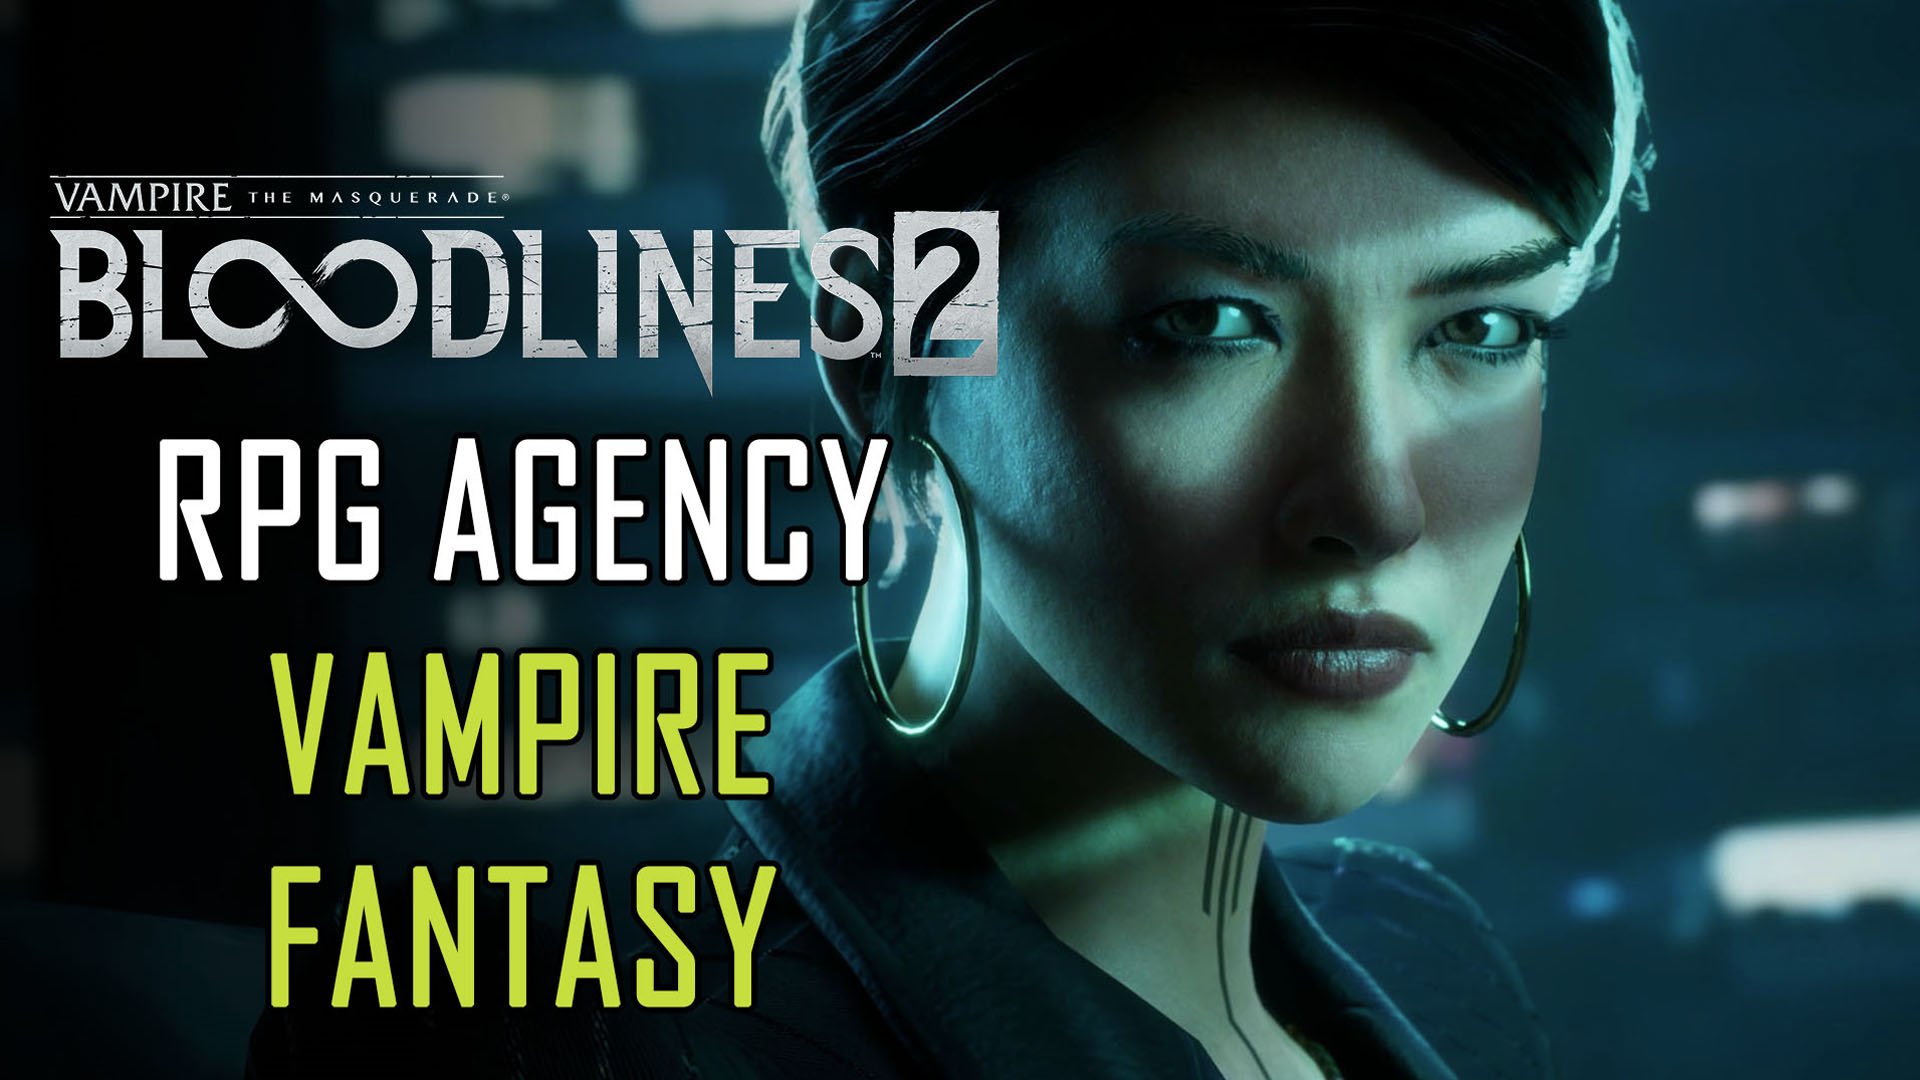 Vampire: The Masquerade - Bloodlines 2 to Focus on RPG Agency - Fextralife